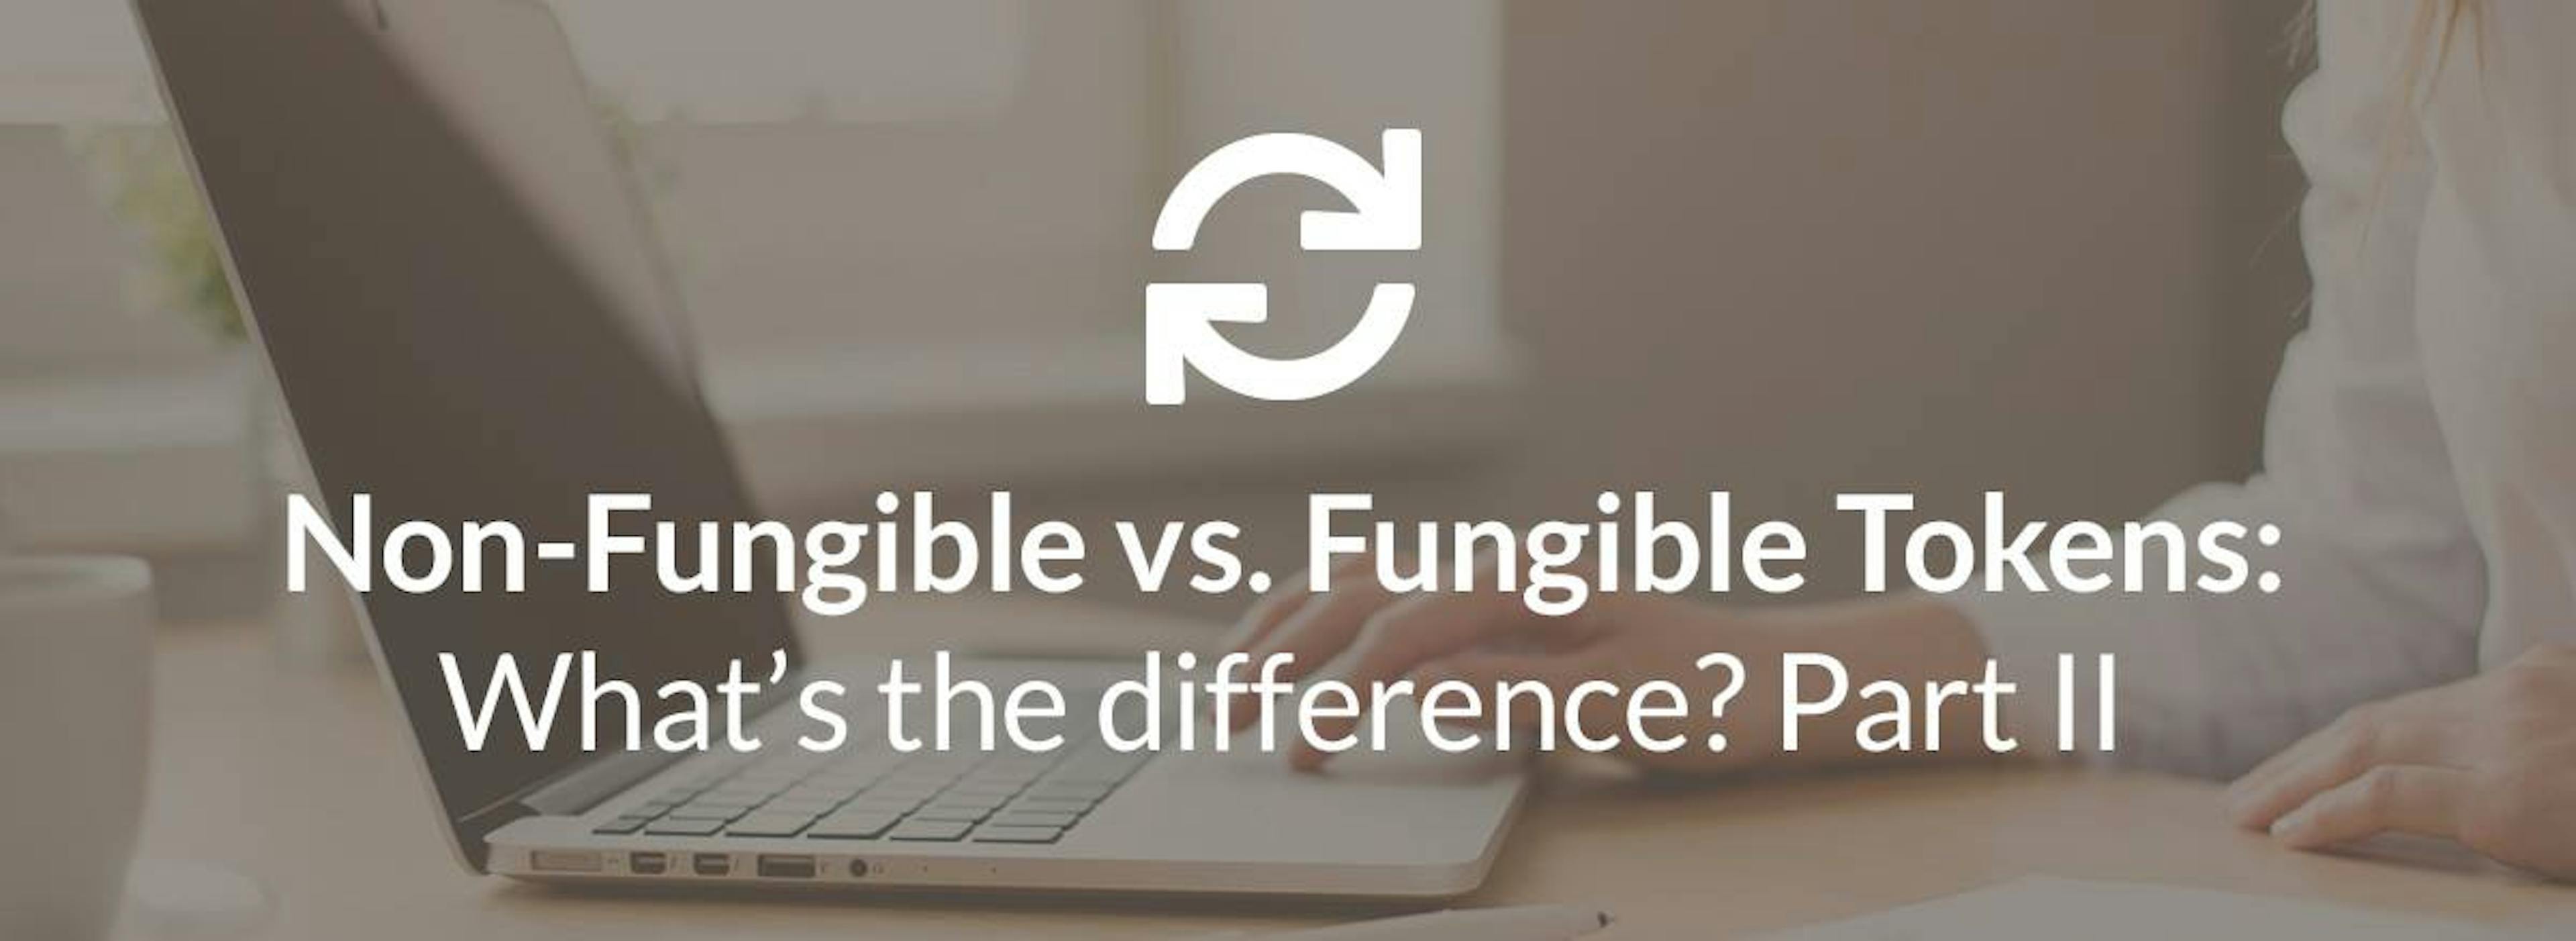 /non-fungible-tokens-vs-fungible-tokens-whats-the-difference-part-ii-f4b7e81f5942 feature image